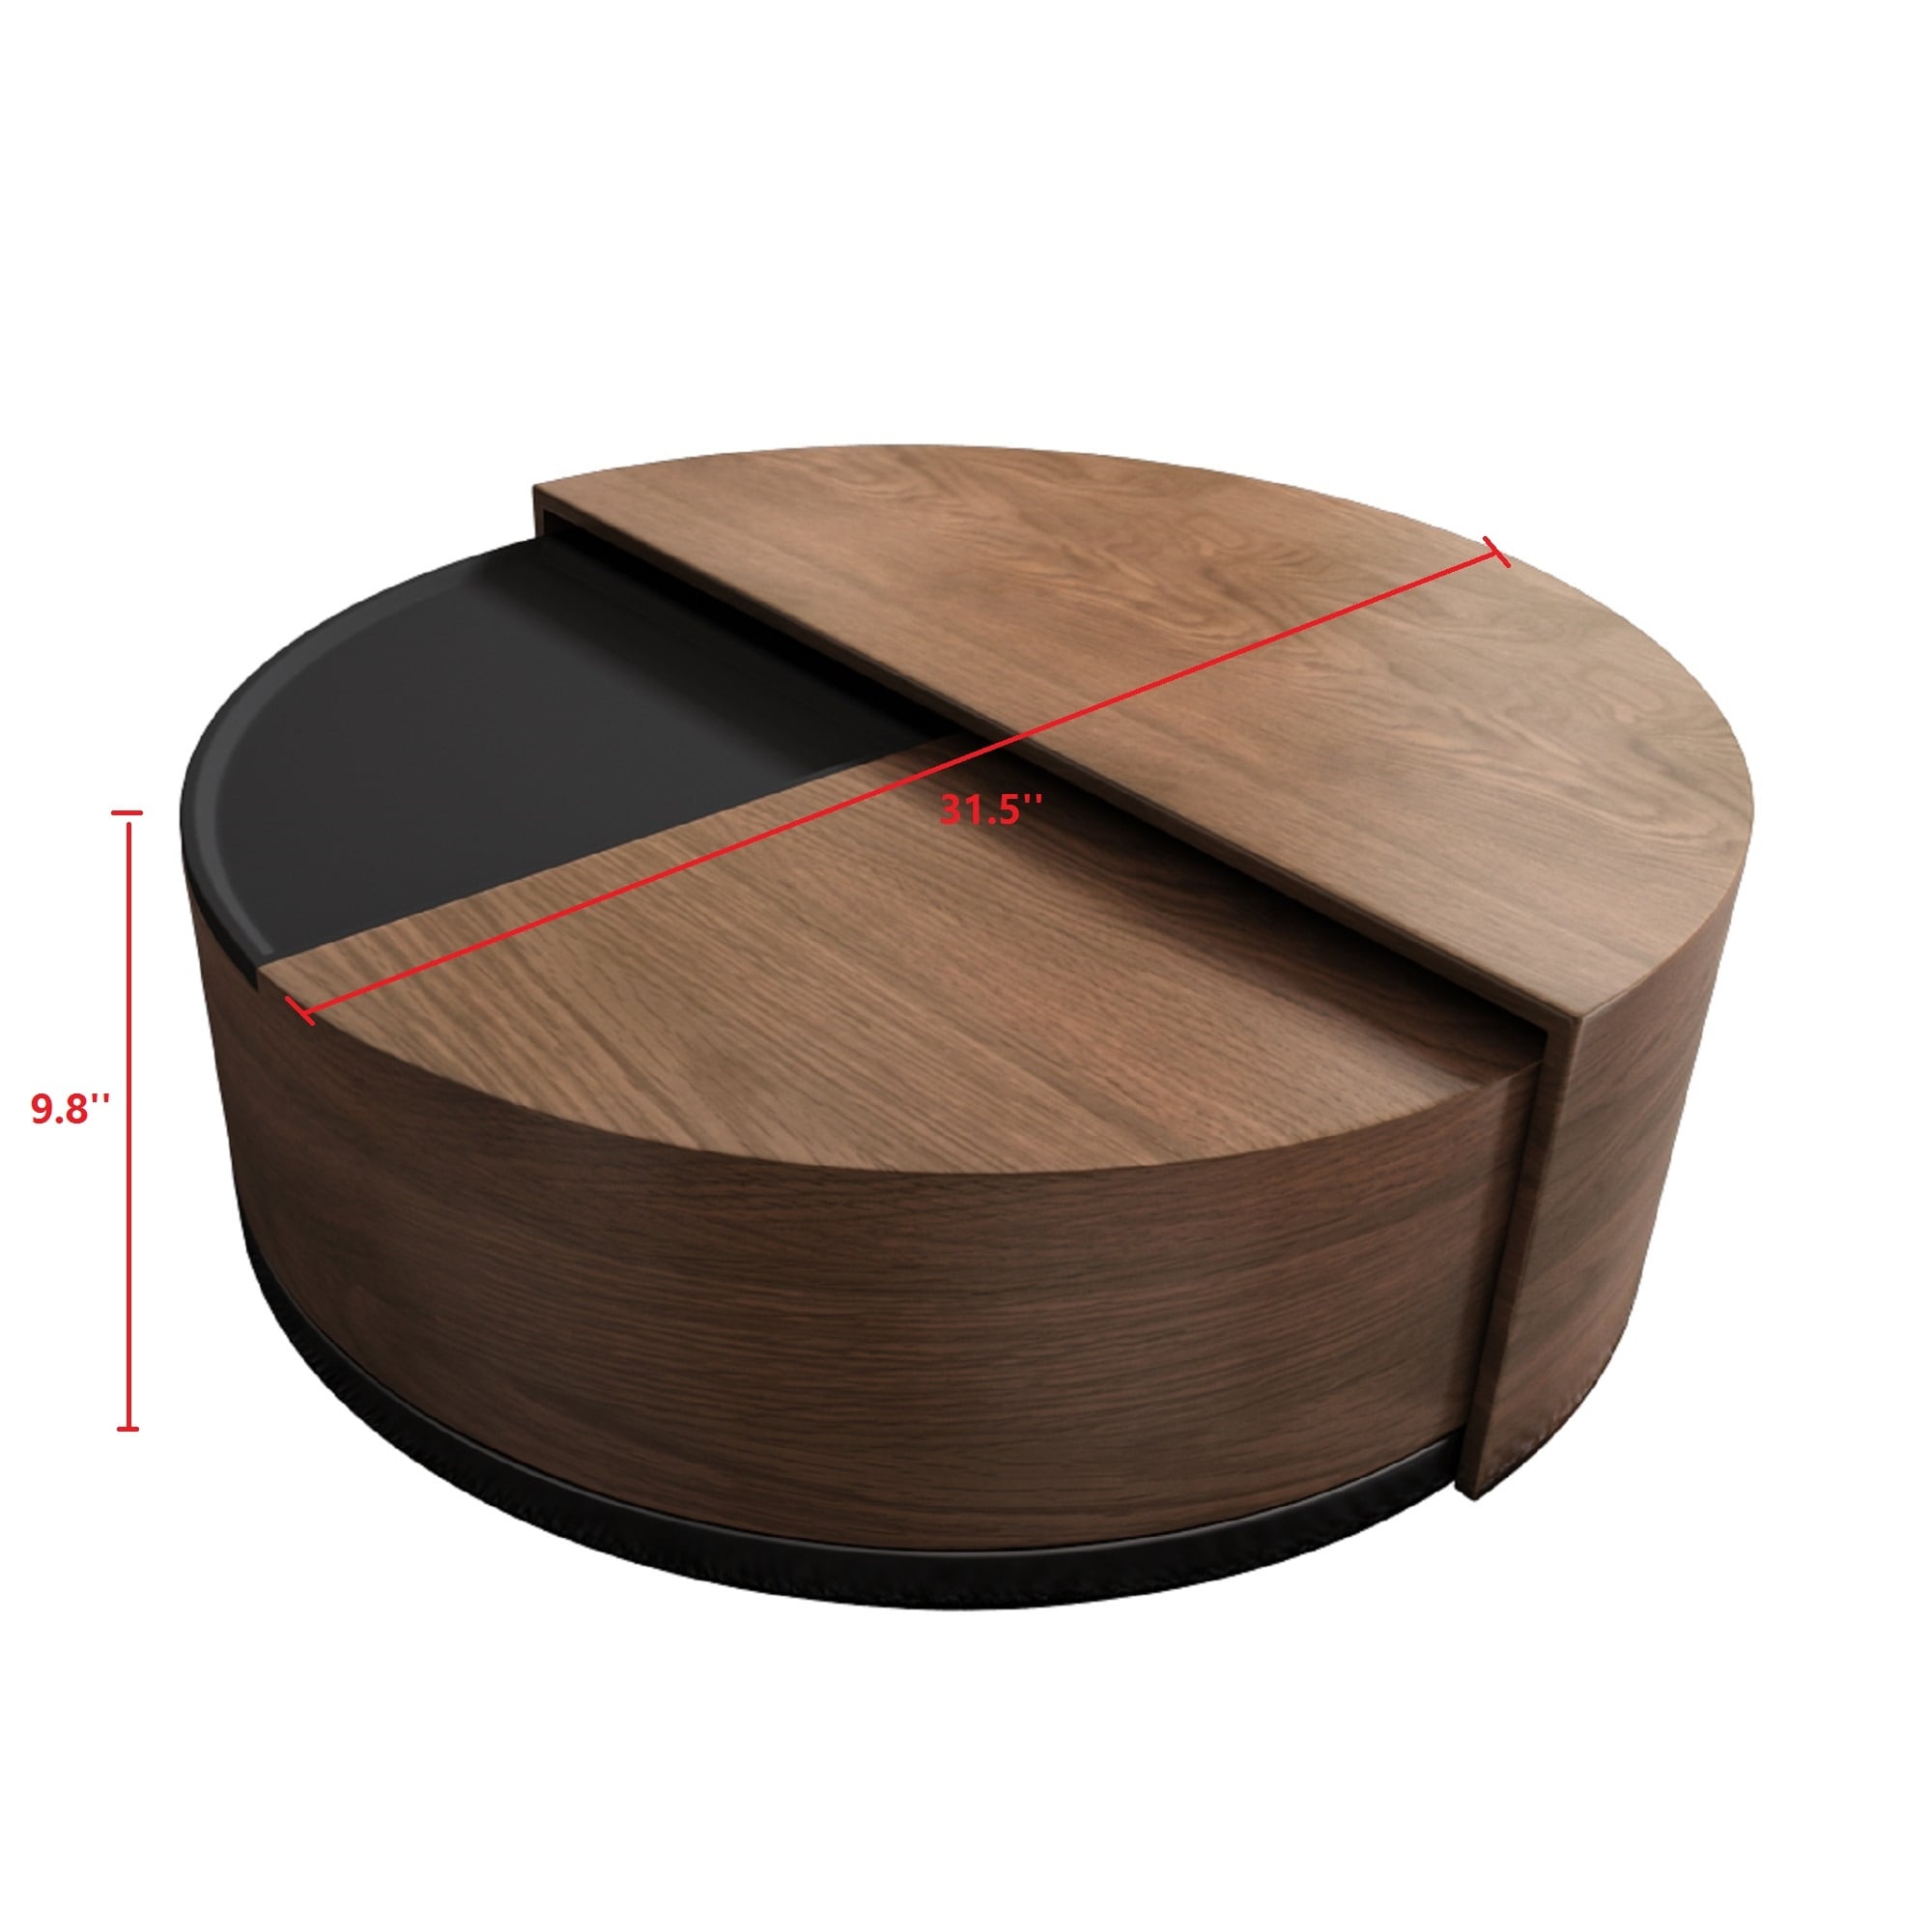 JASIWAY Drum Coffee Table with Storage